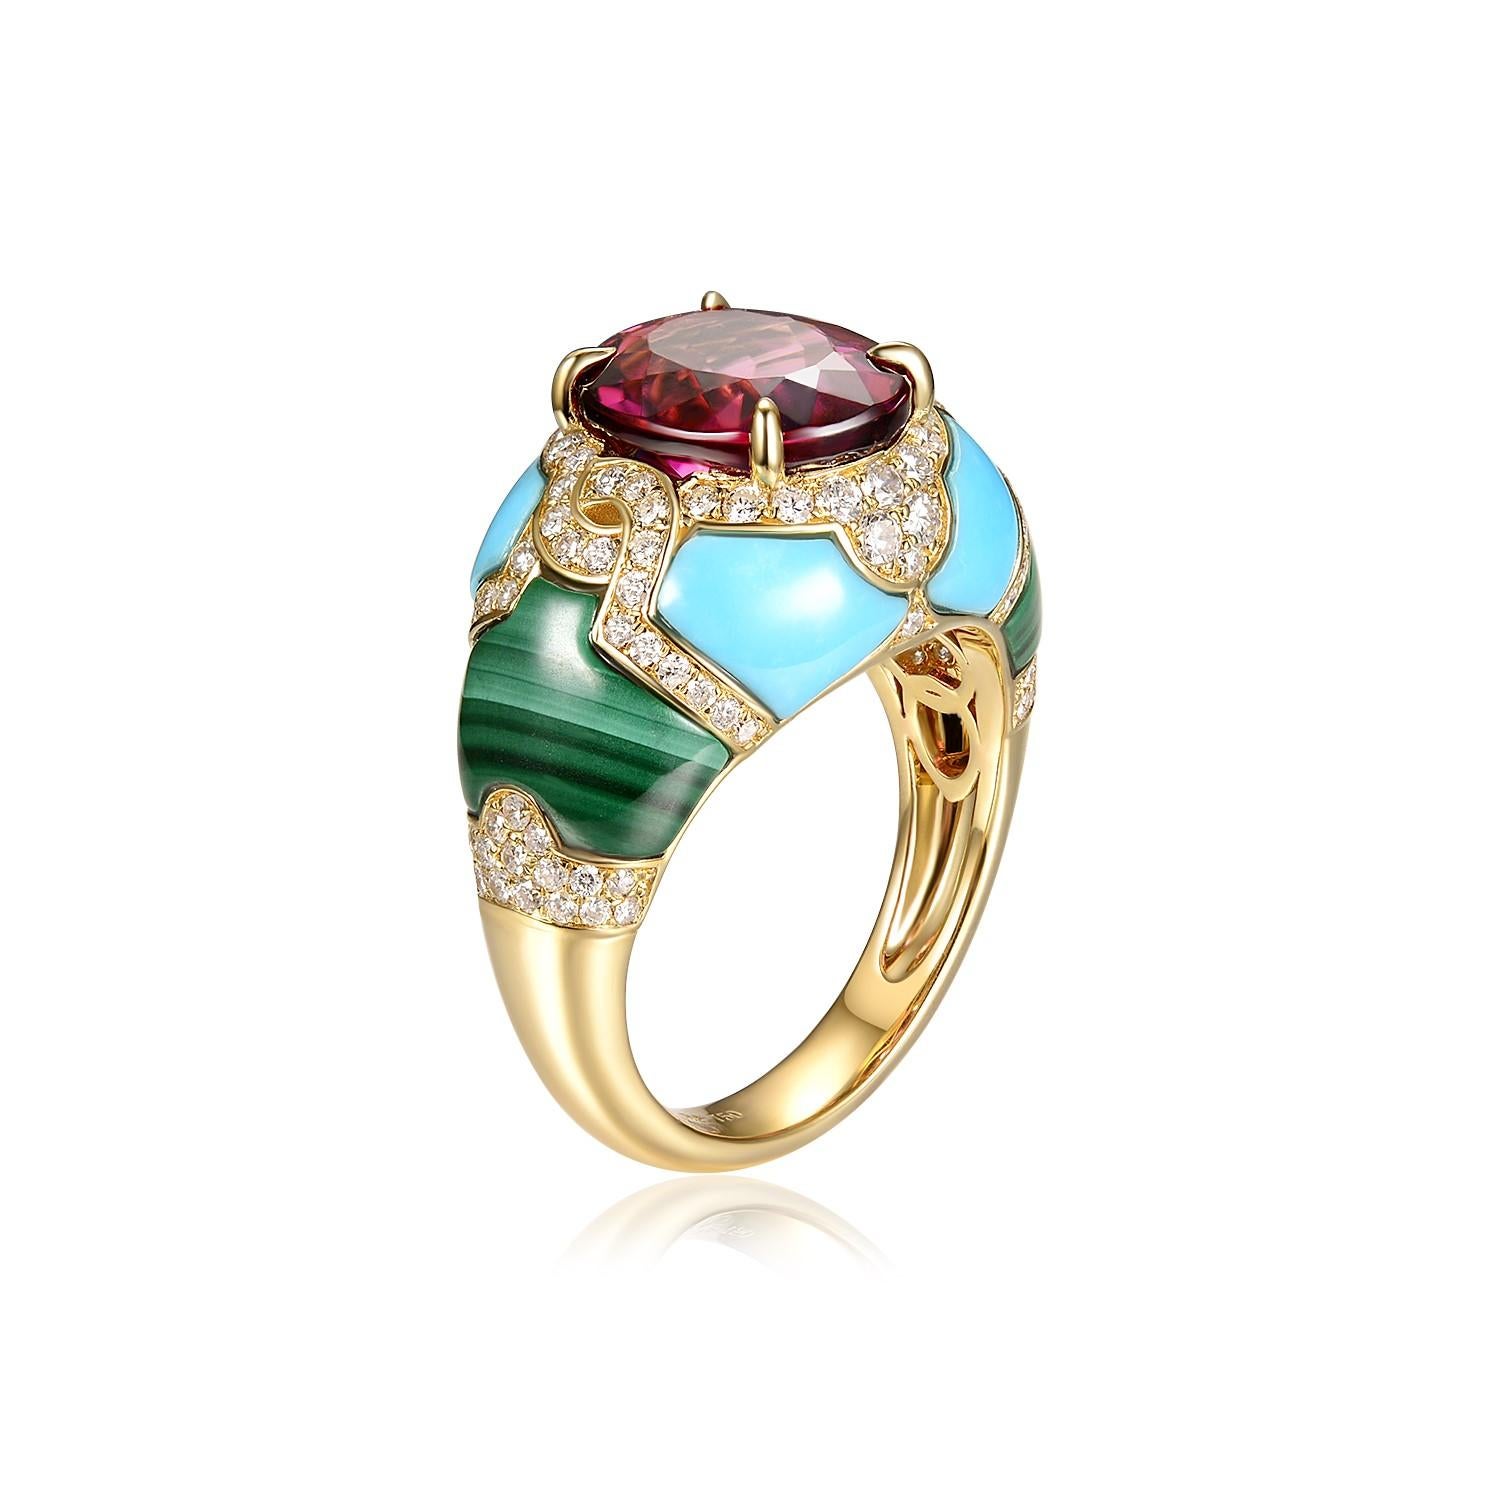 Dazzle and inspire with this remarkable 4.29 carat tourmaline cocktail ring, a sparkling tribute to the beauty of precious gems. At its heart sits a stunning 4.29-carat pink tourmaline, known for its vibrant hues and deep meaning. Enchantingly